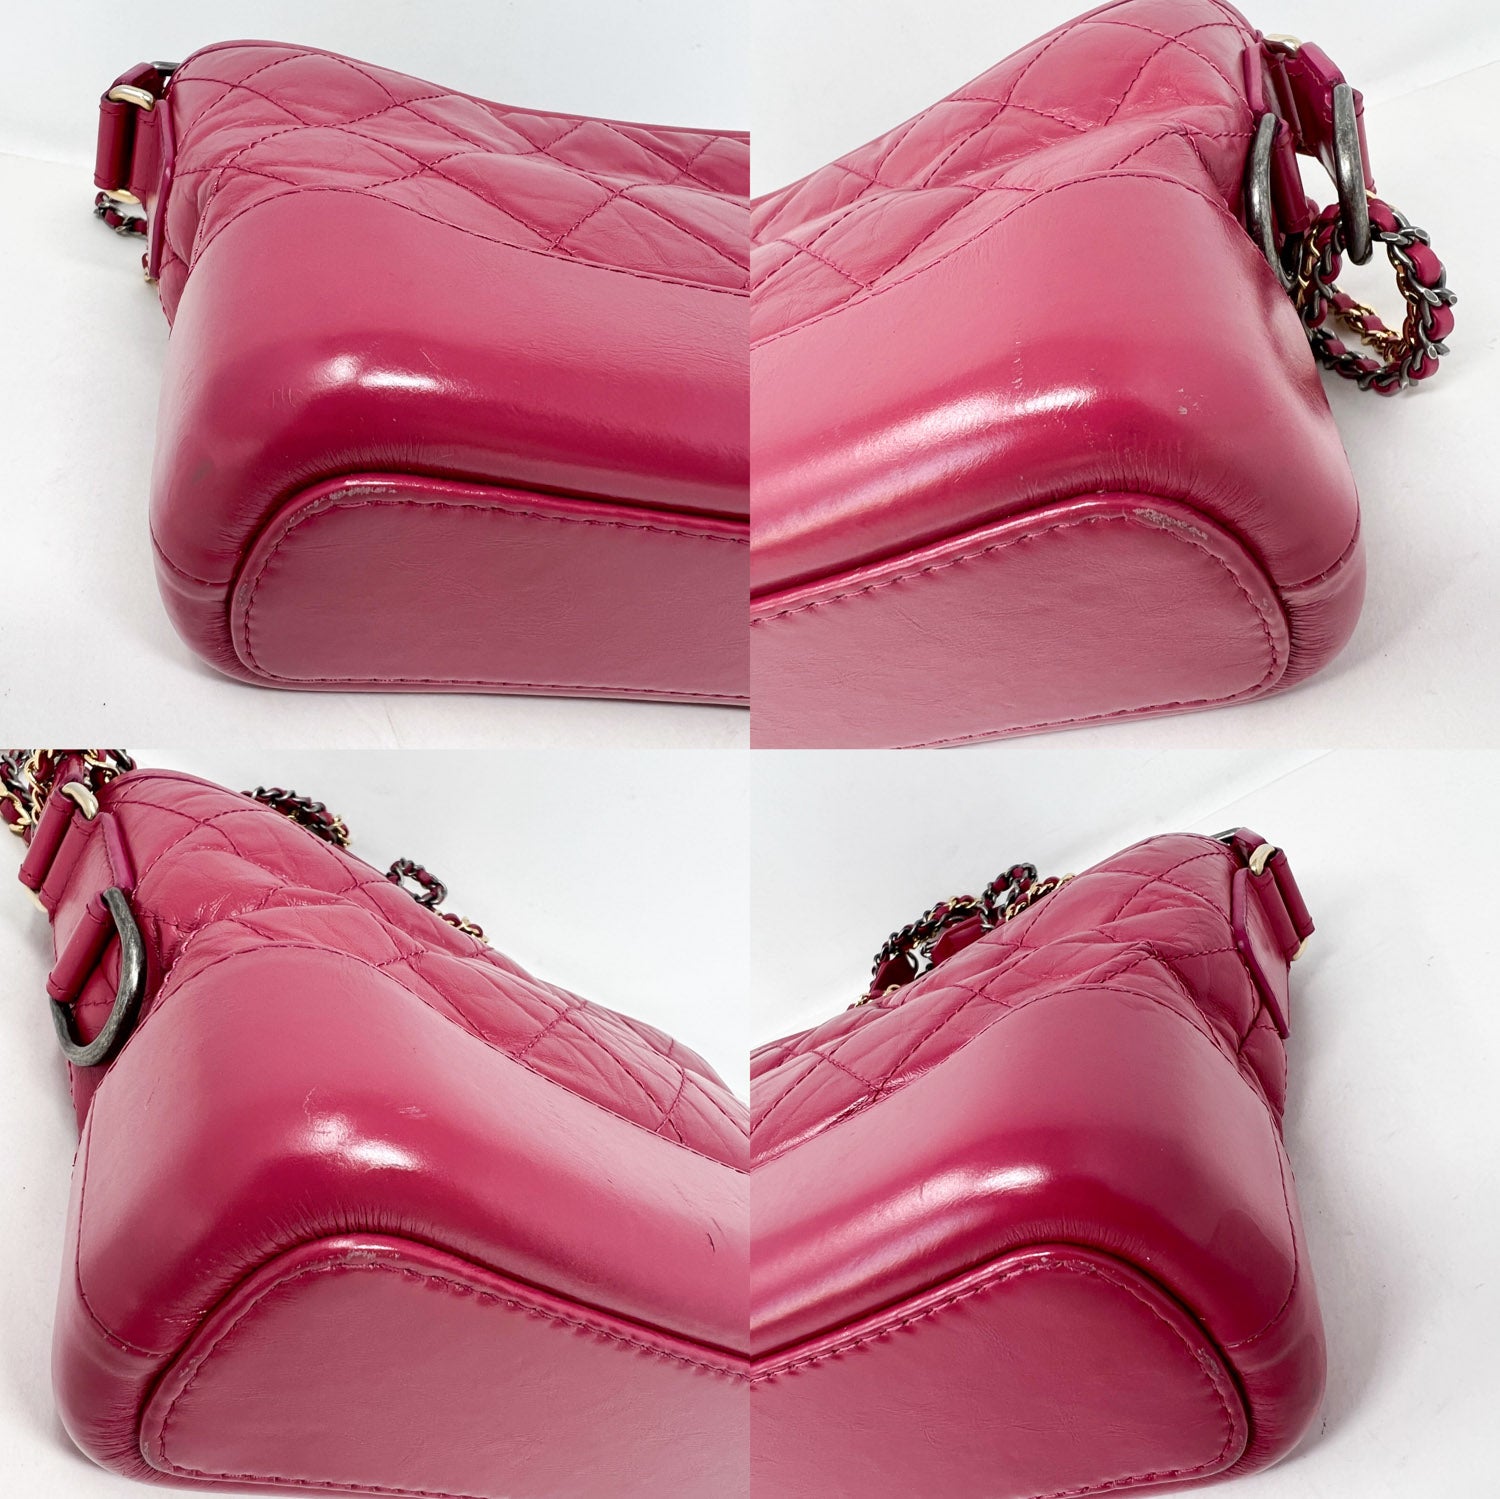 Chanel Gabrielle Hobo Bag Diamond Stitched Small Pink in Tweed